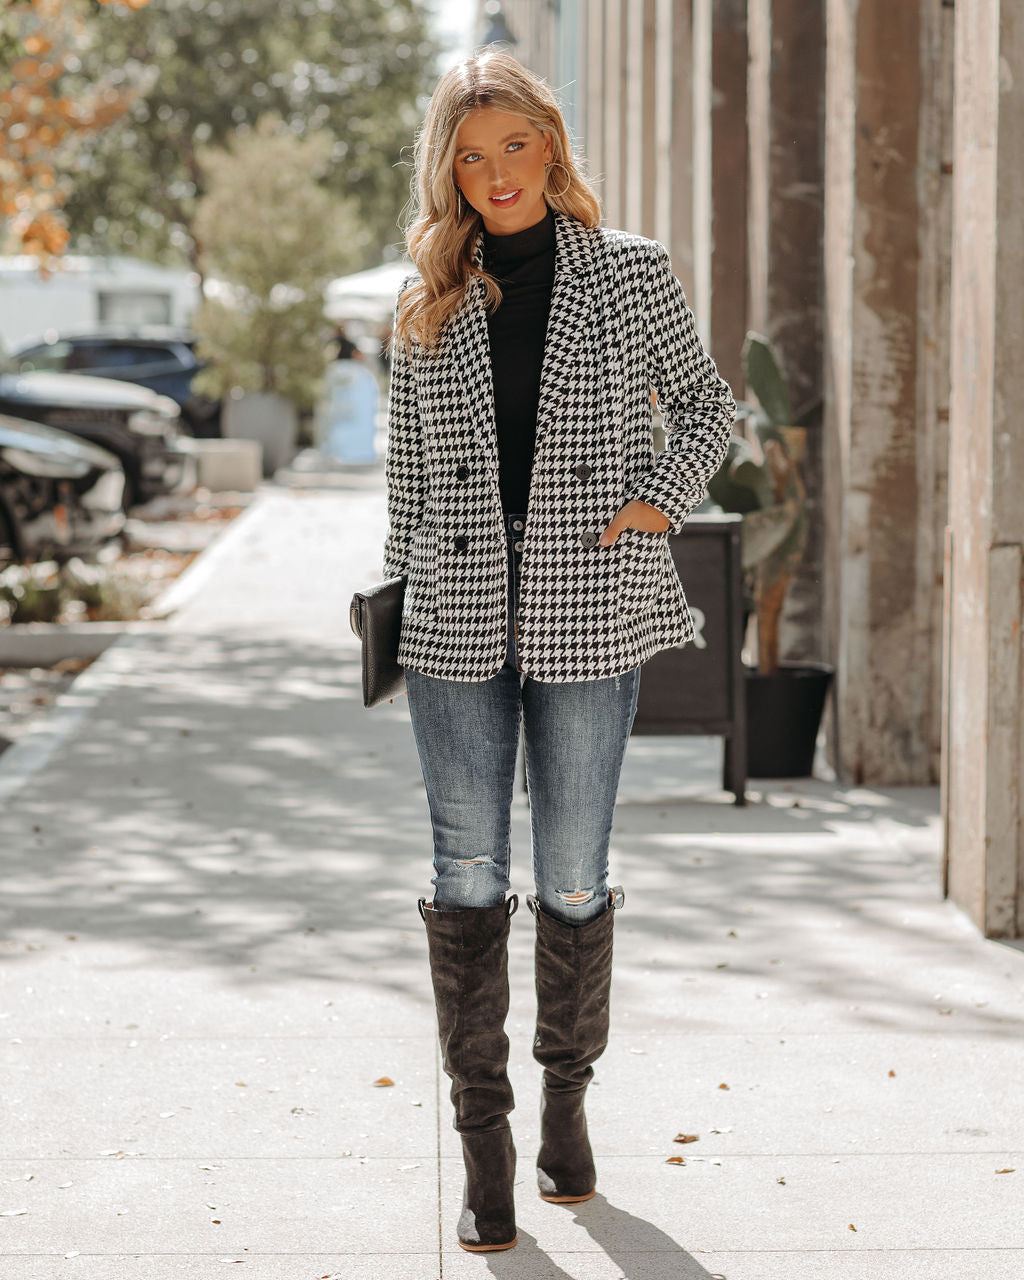 Demille Pocketed Houndstooth Peacoat